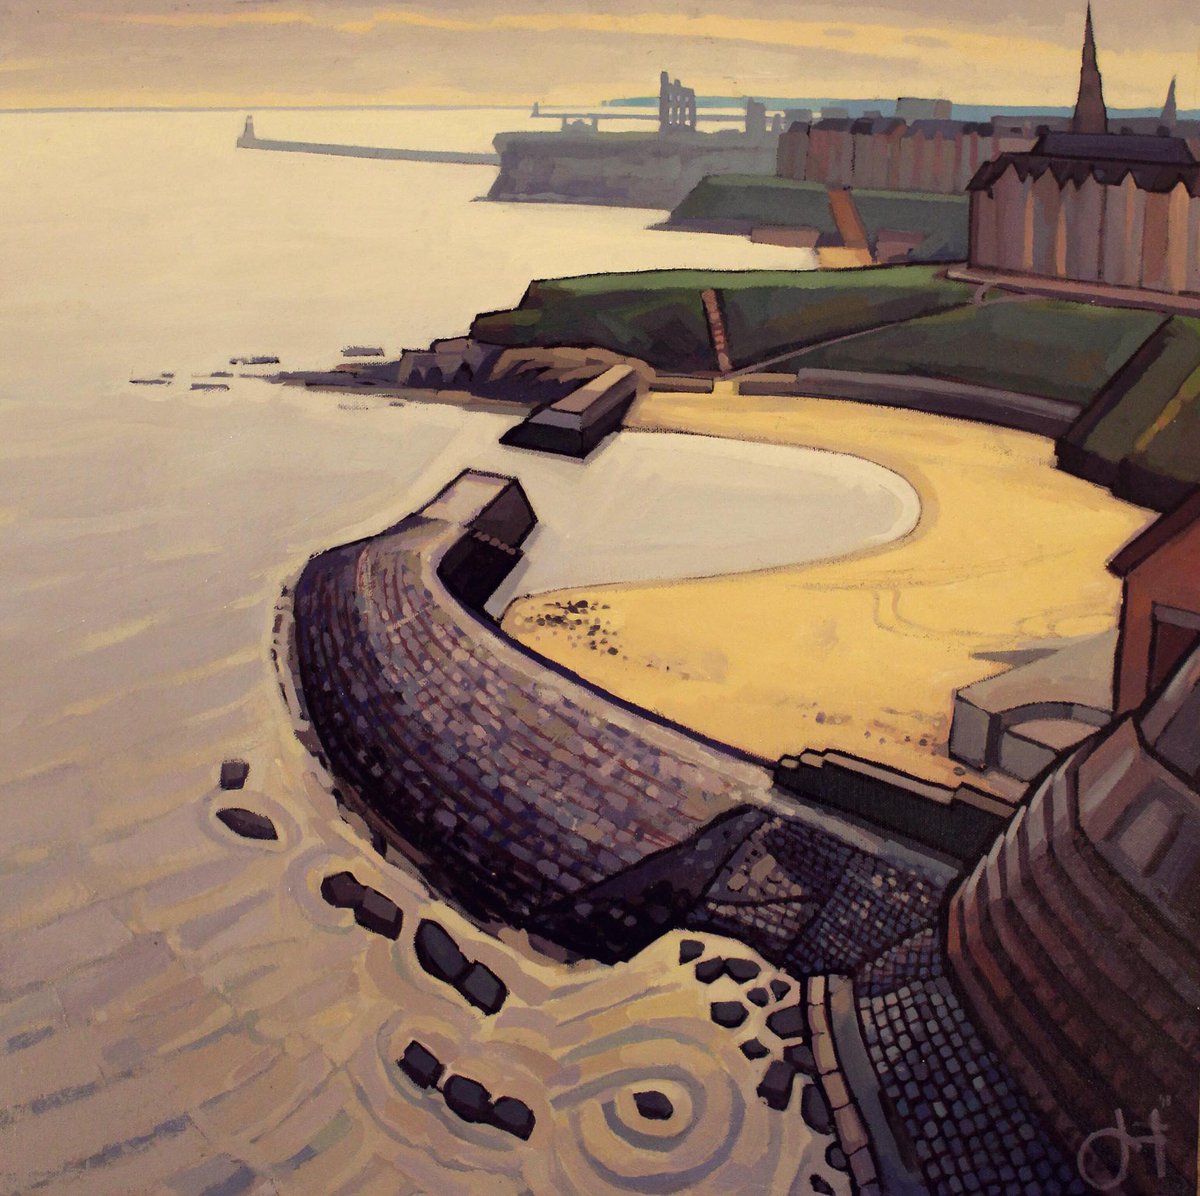 Cullercoats Bay - Jim Edwards Back in today, after @OuseburnOpen, restocking prints, inc this one Cullercoats Bay. Studio closed tomorrow & Thursday, as I’ll be up in Glasgow. Back in on Friday jimedwardspaintings.com/store/p152/Cul… #cullercoats #cullercoatsbay #northtyneside